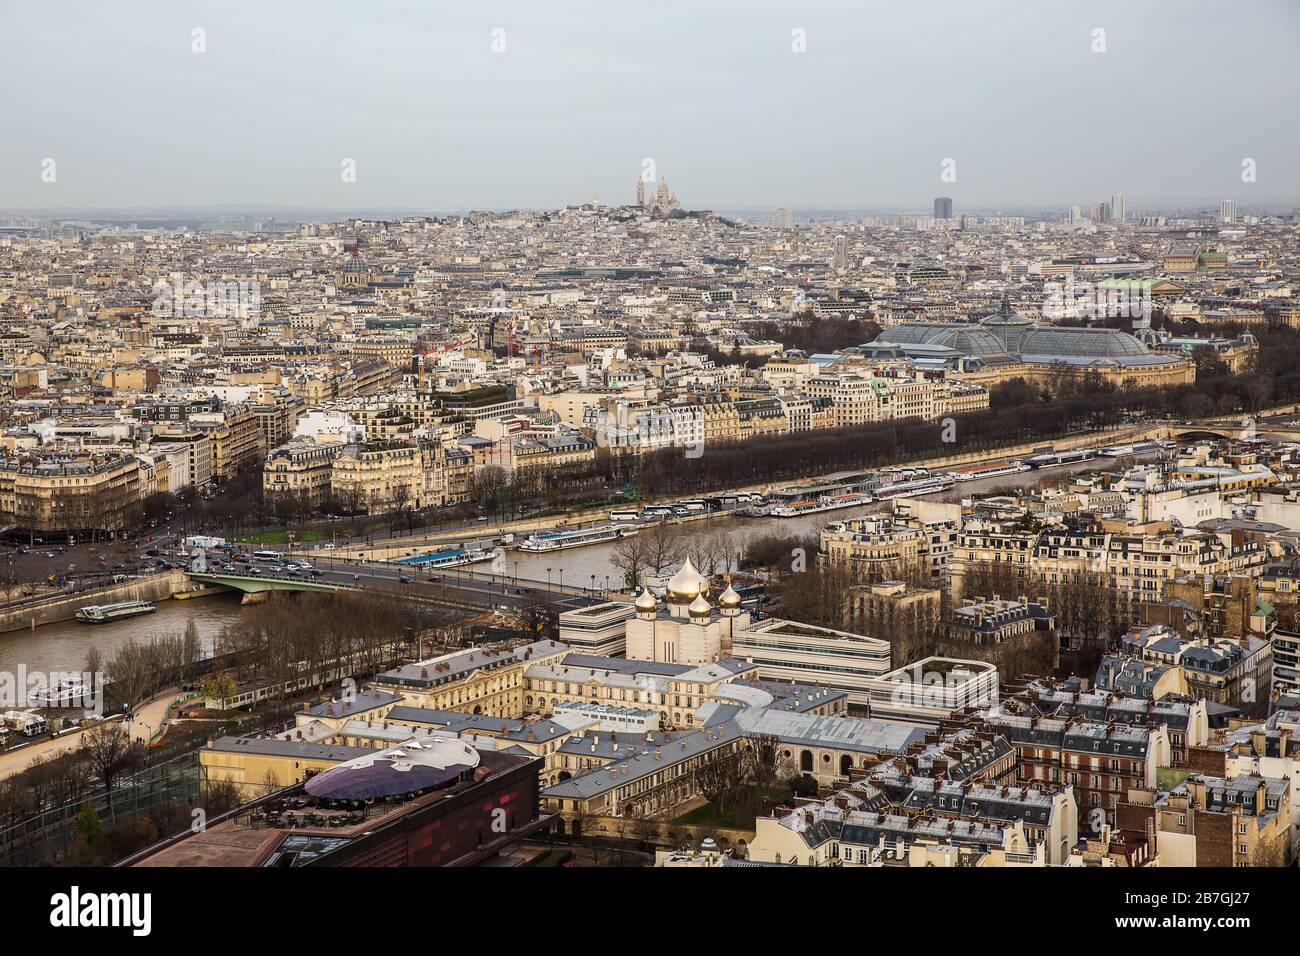 Aerial view of Paris city and Seine river from Eiffel Tower. Stock Photo